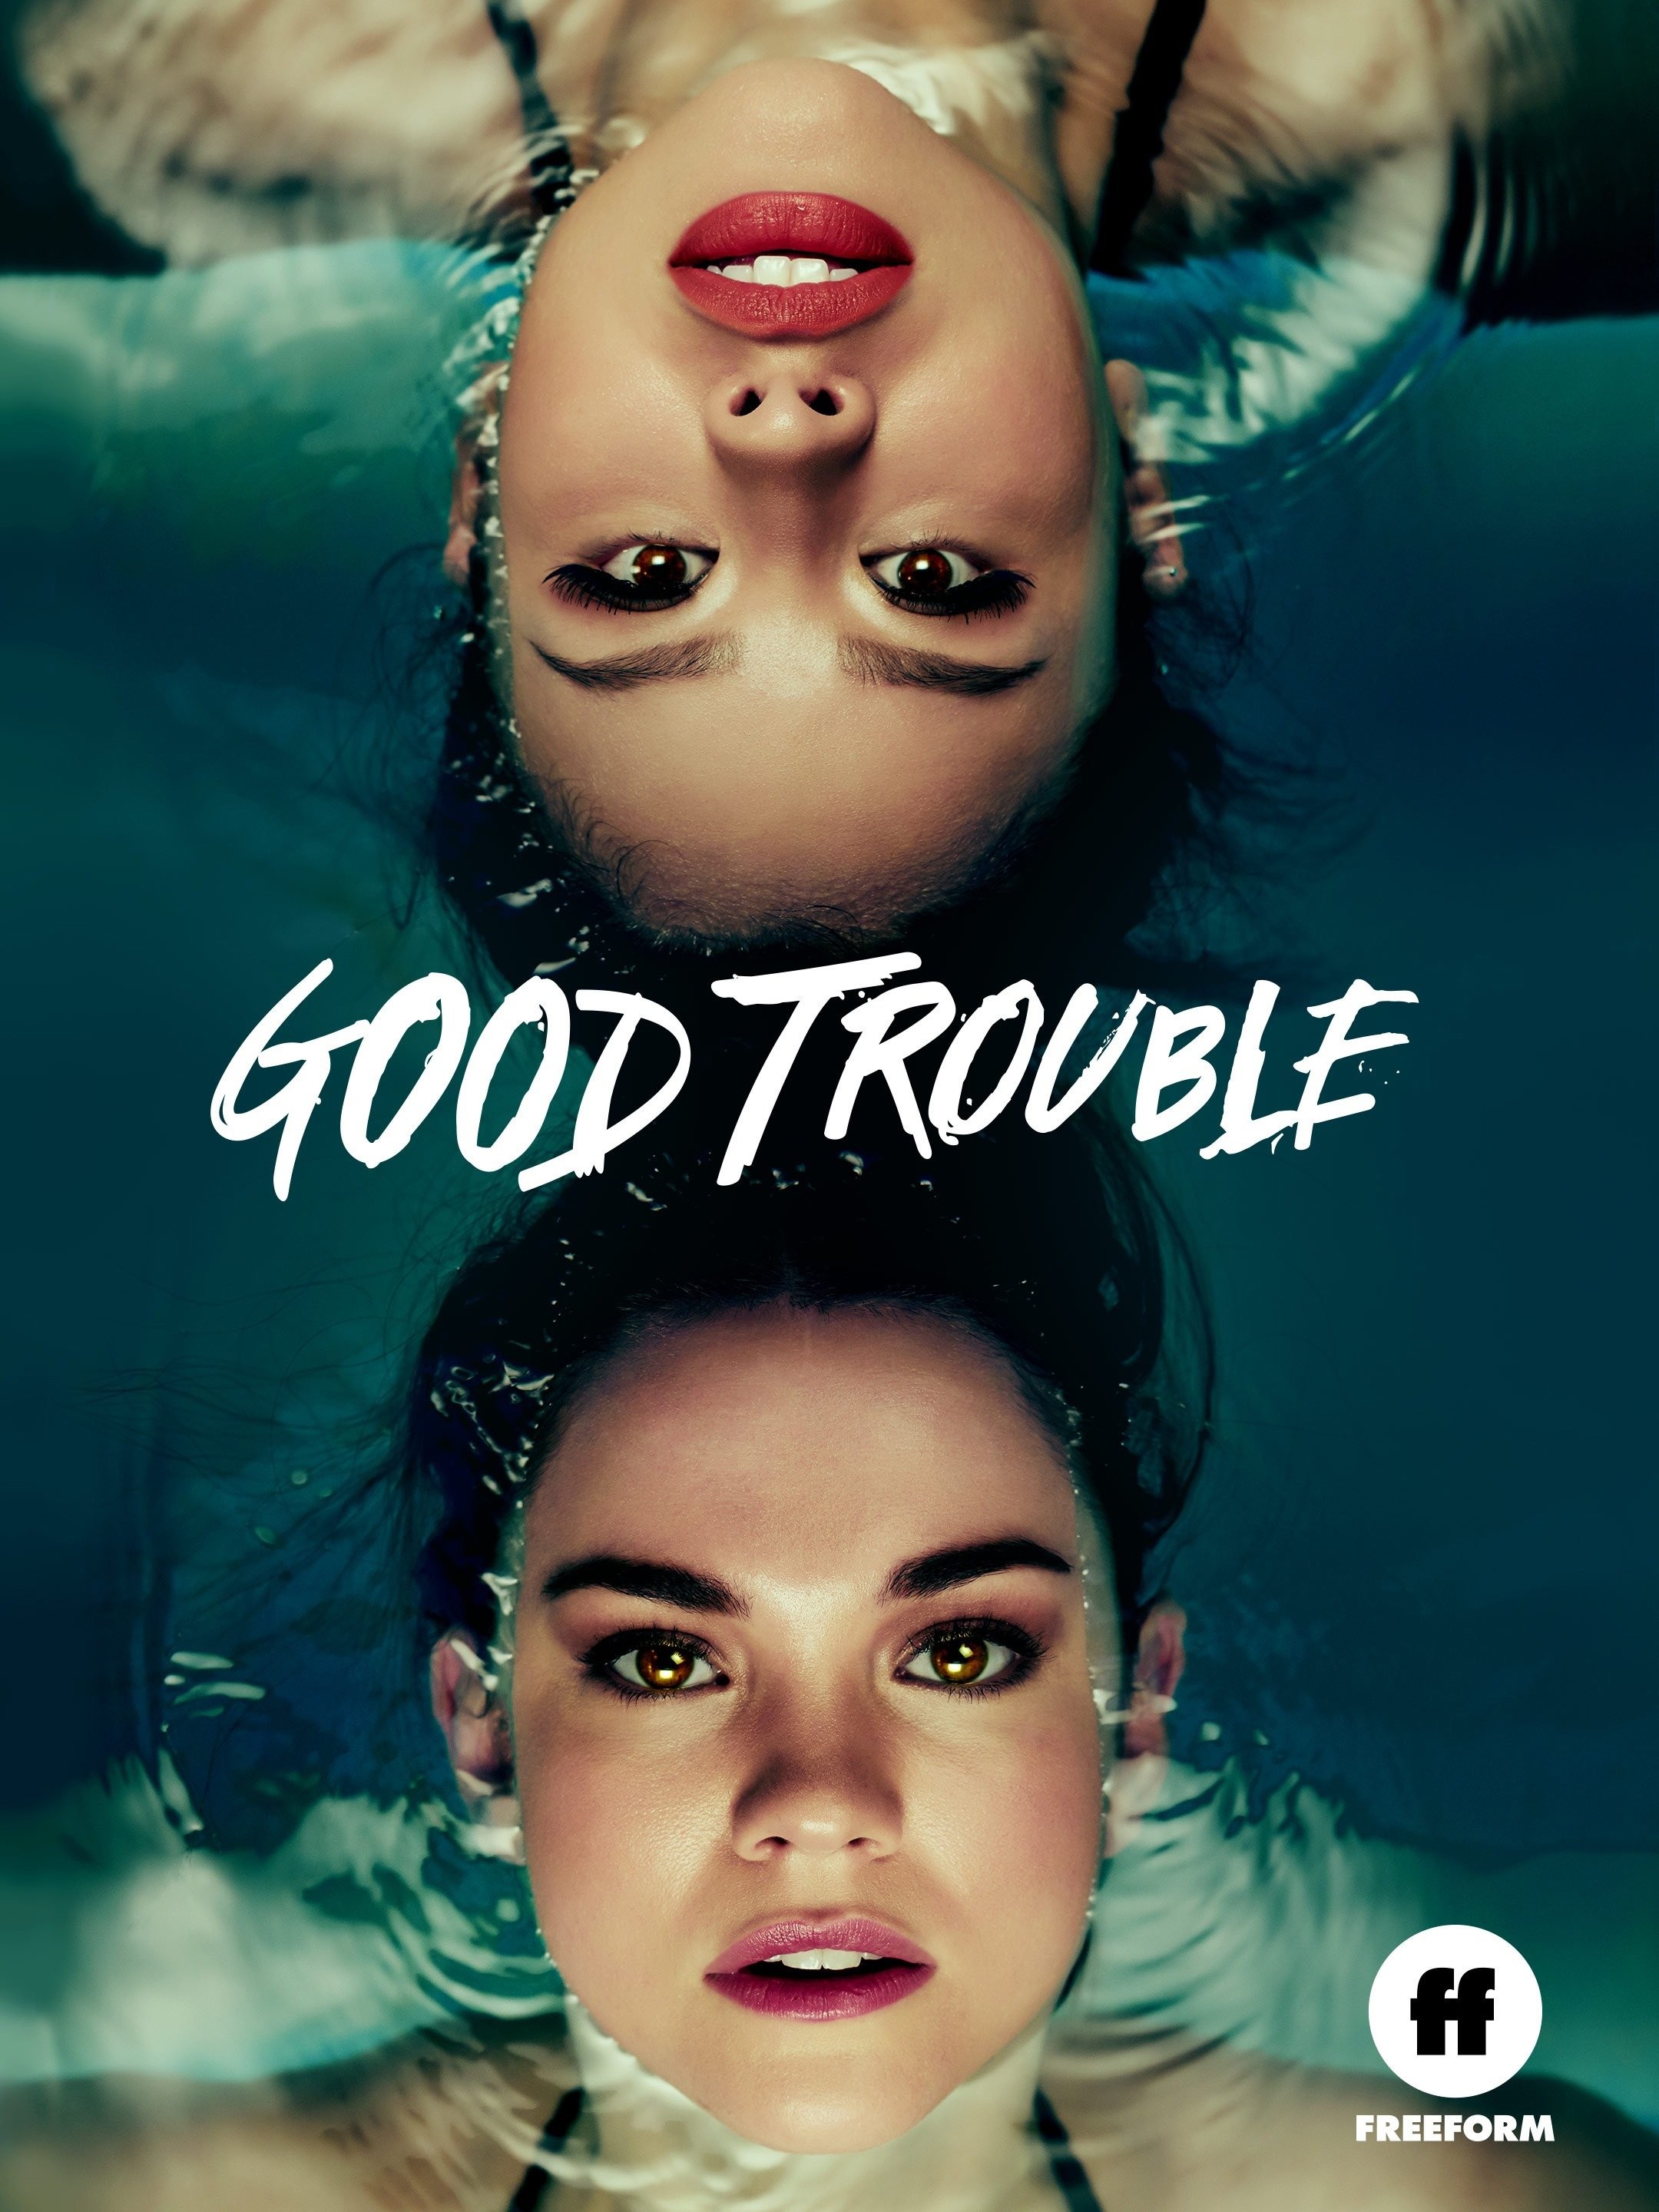 Trouble, troubles you! #movies #superdialogue